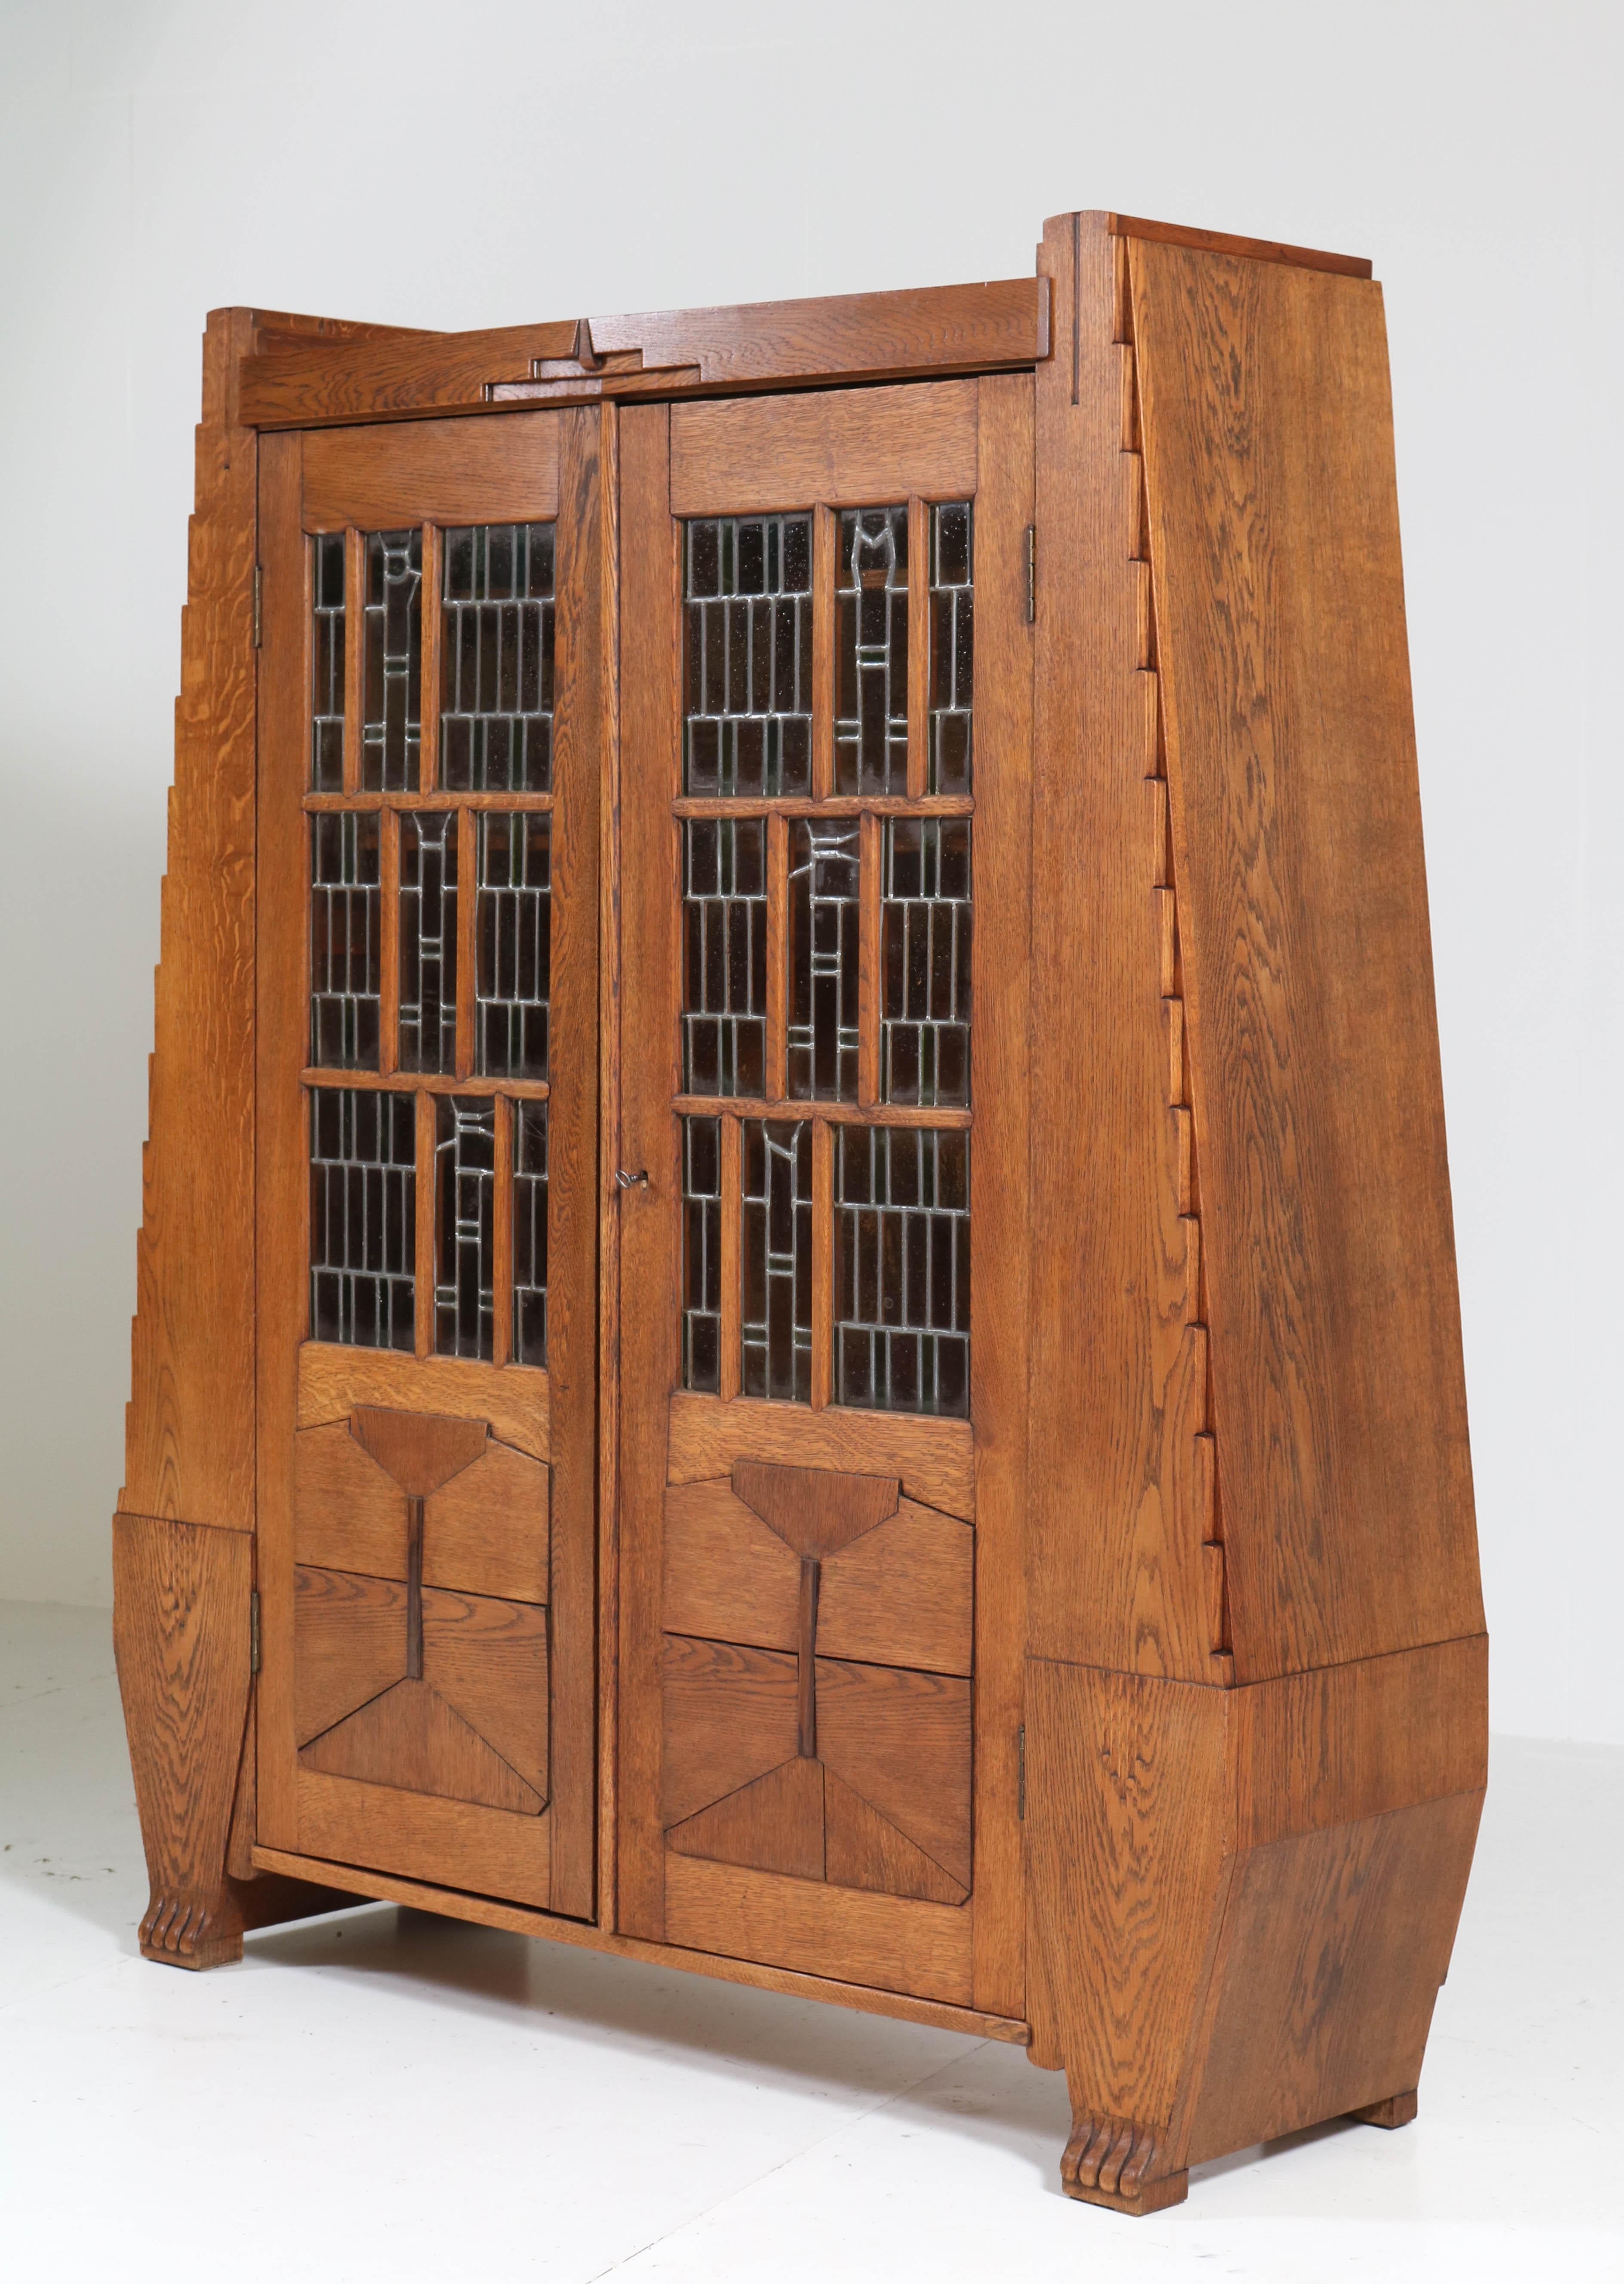 Oak Art Deco Amsterdam School Bookcase with Stained Glass by Hildo Krop, 1918 4